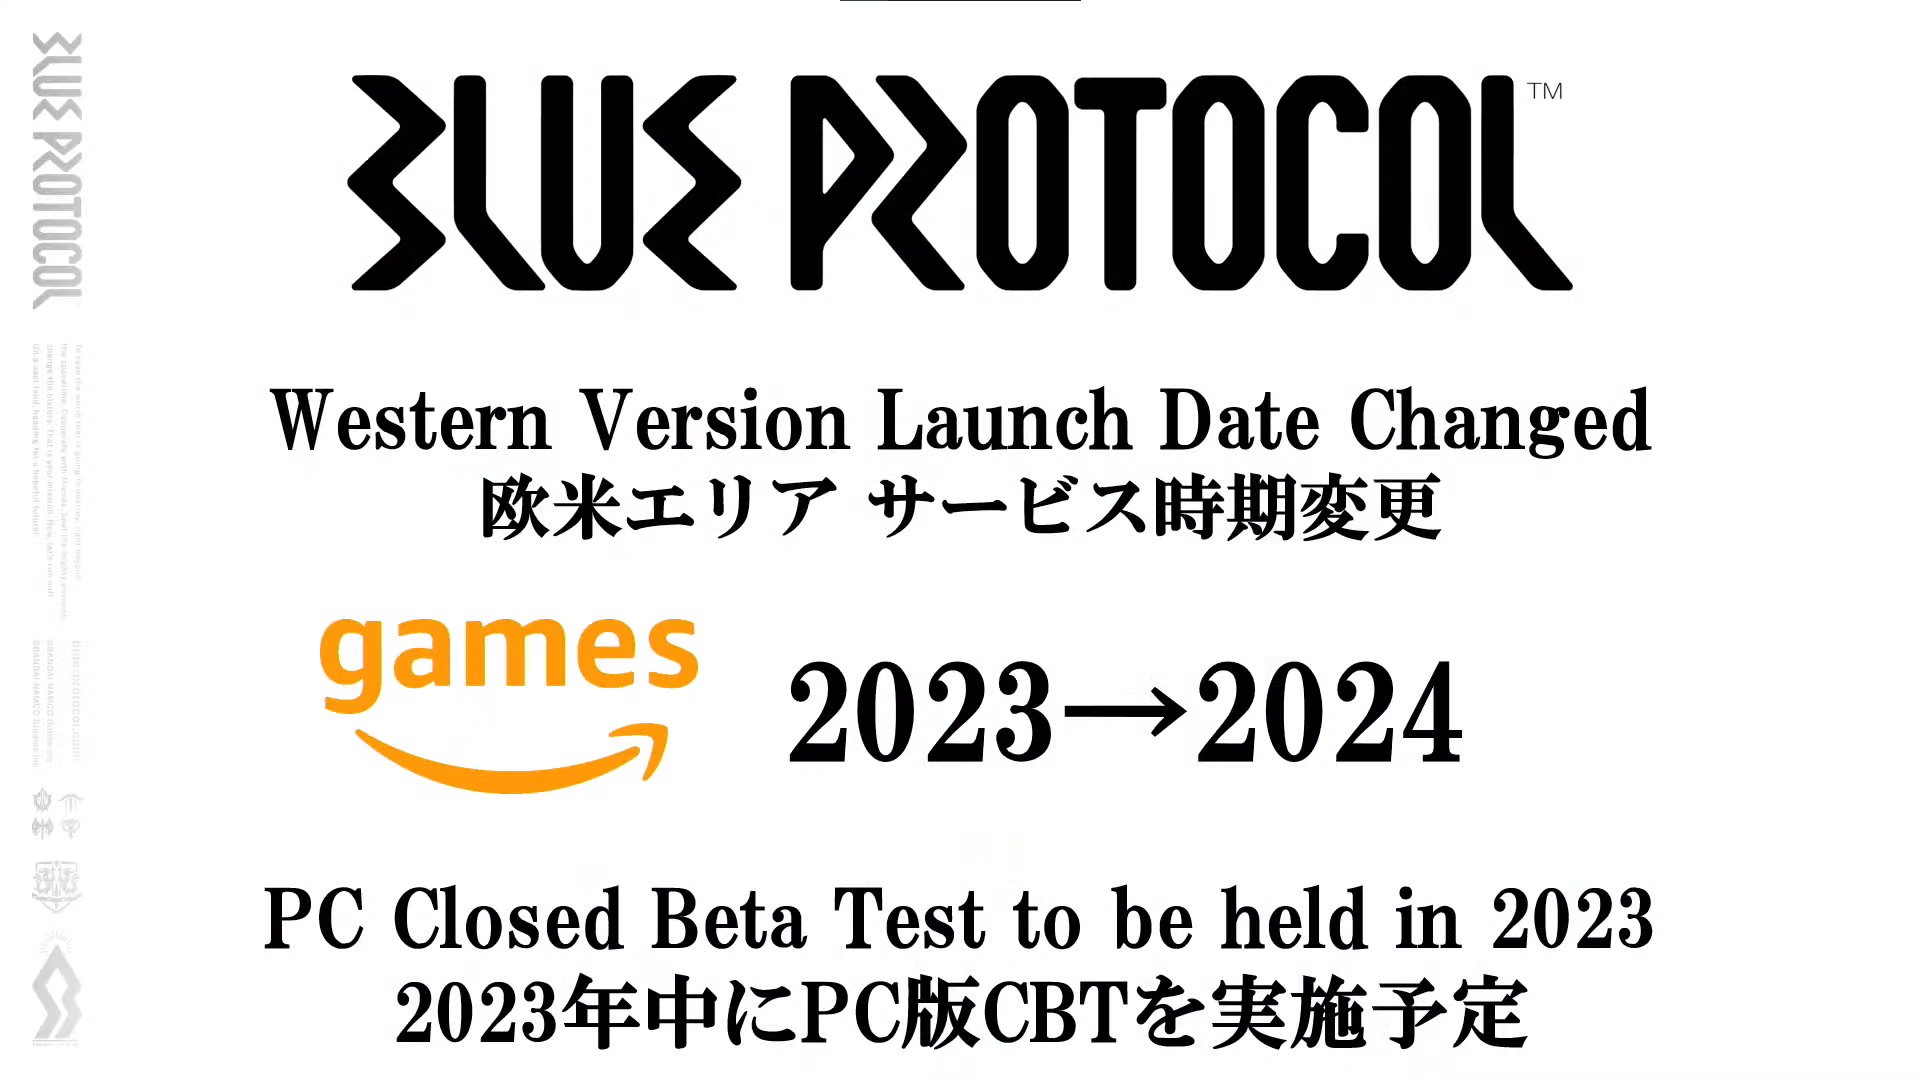 The BLUE PROTOCOL Database on X: 🌎Unfortunately, the release date Global  version of Blue Protocol has been moved to 2024. However, the Closed Beta  Test for Global is still slated for 2023. #